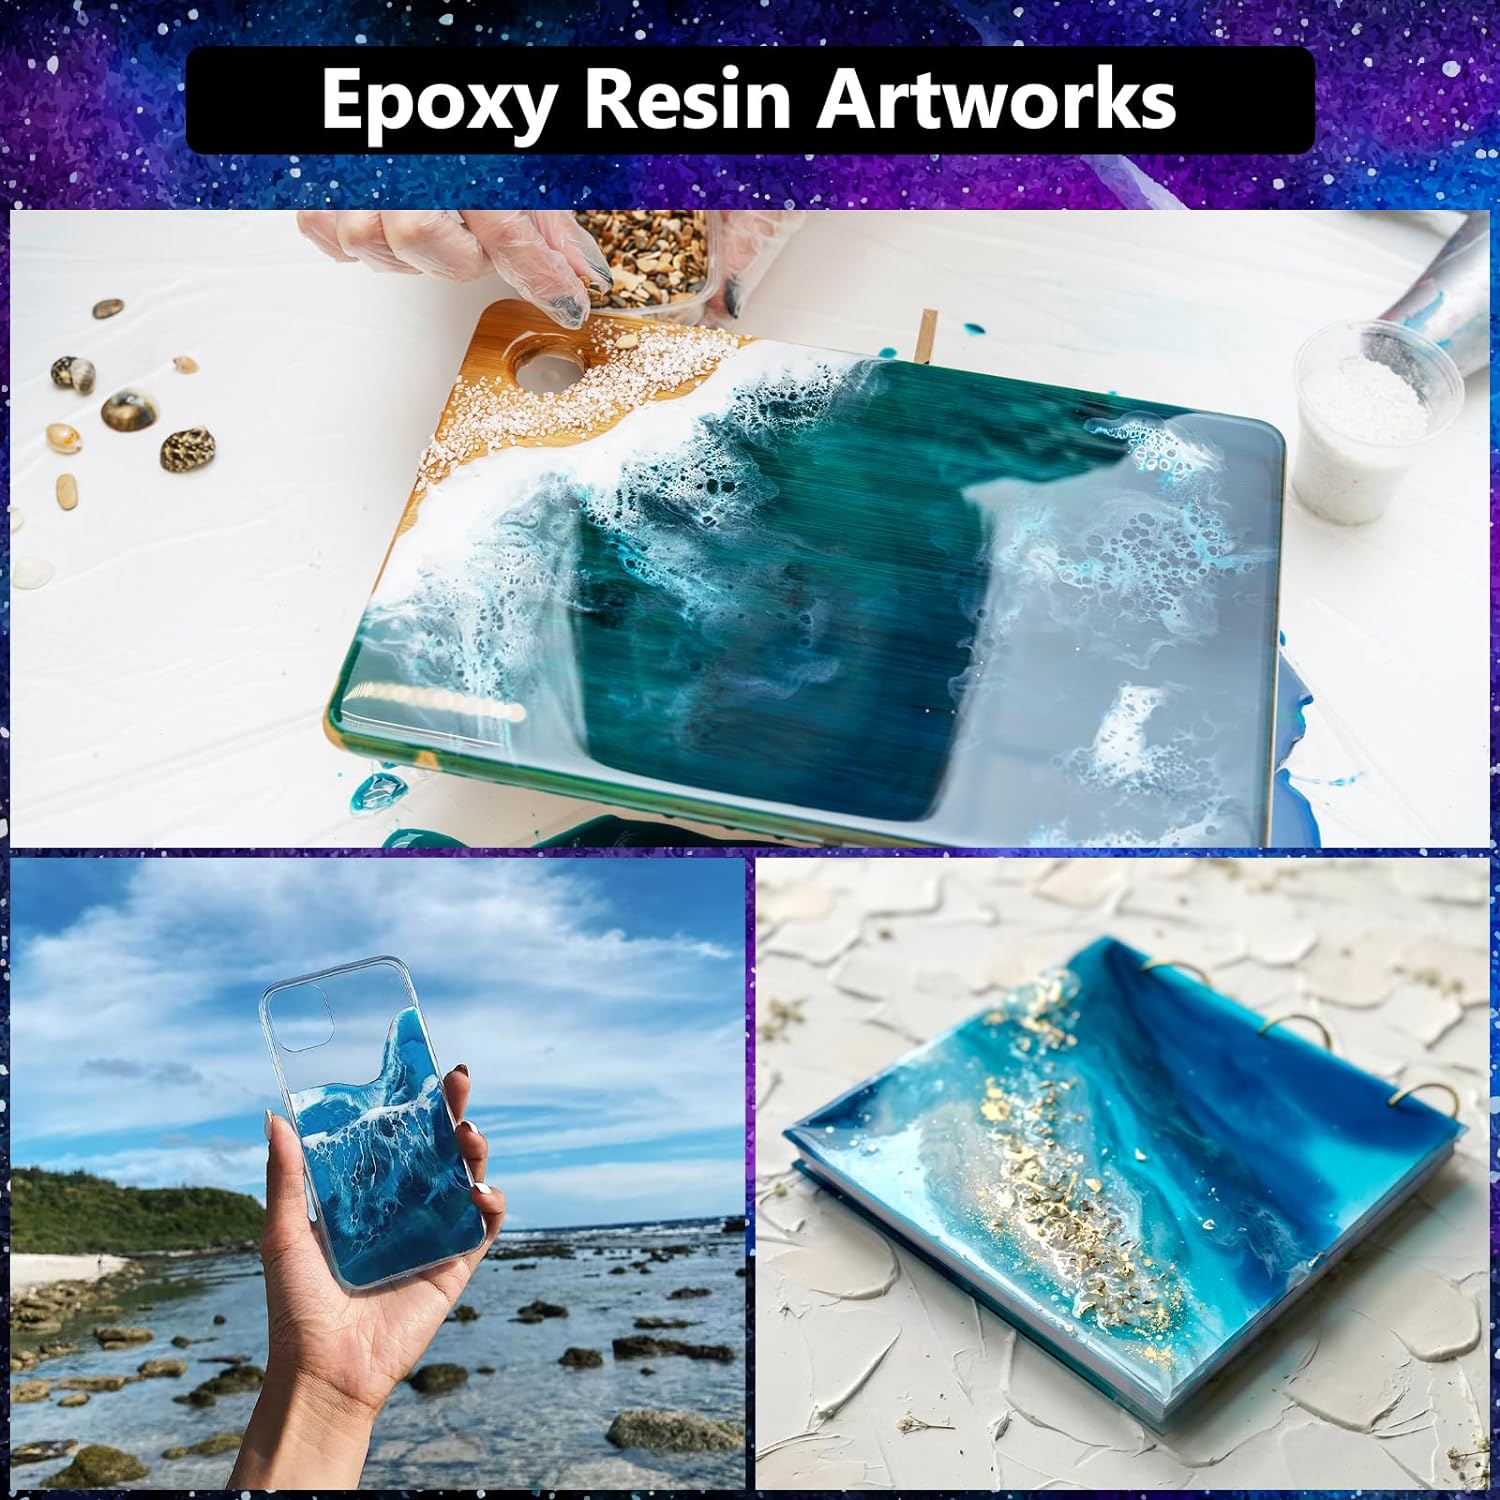 Art Resin  Crystal Clear Epoxy for Crafts & Casting – Upstart Epoxy